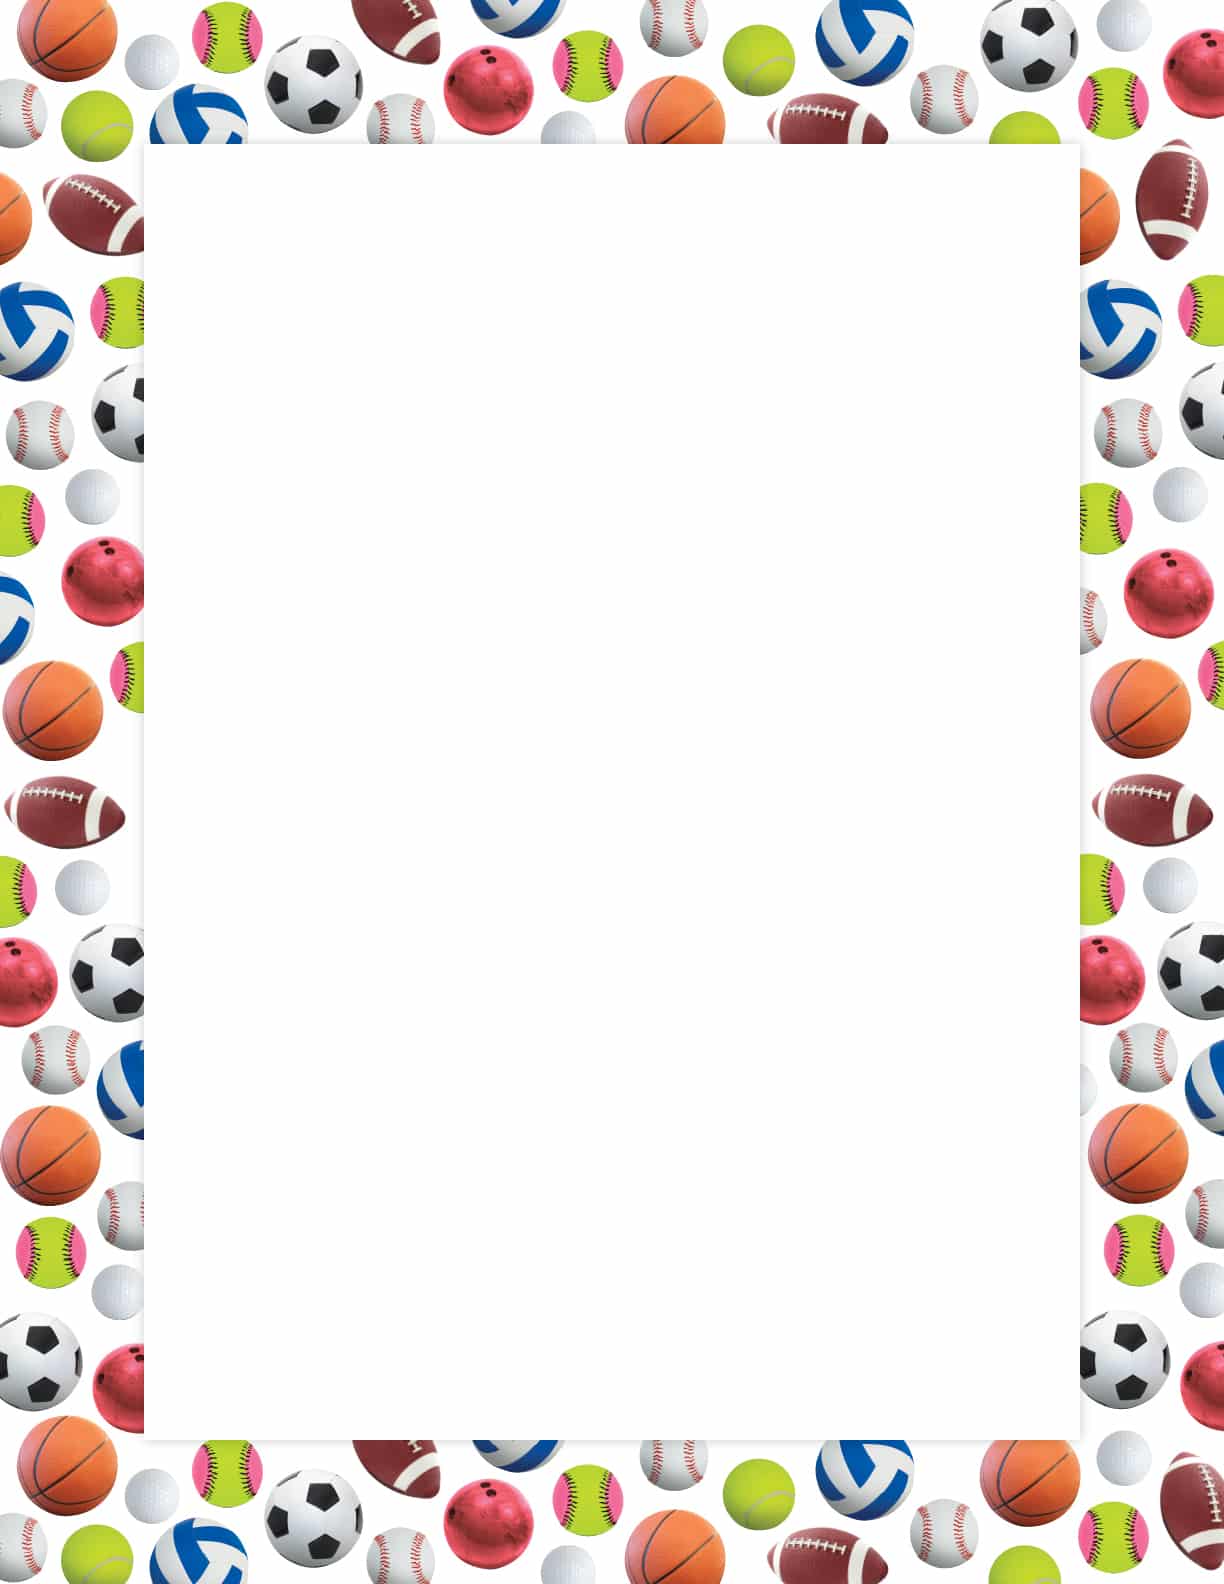 sports-ball-border-poster-craft-and-classroom-supplies-by-hygloss